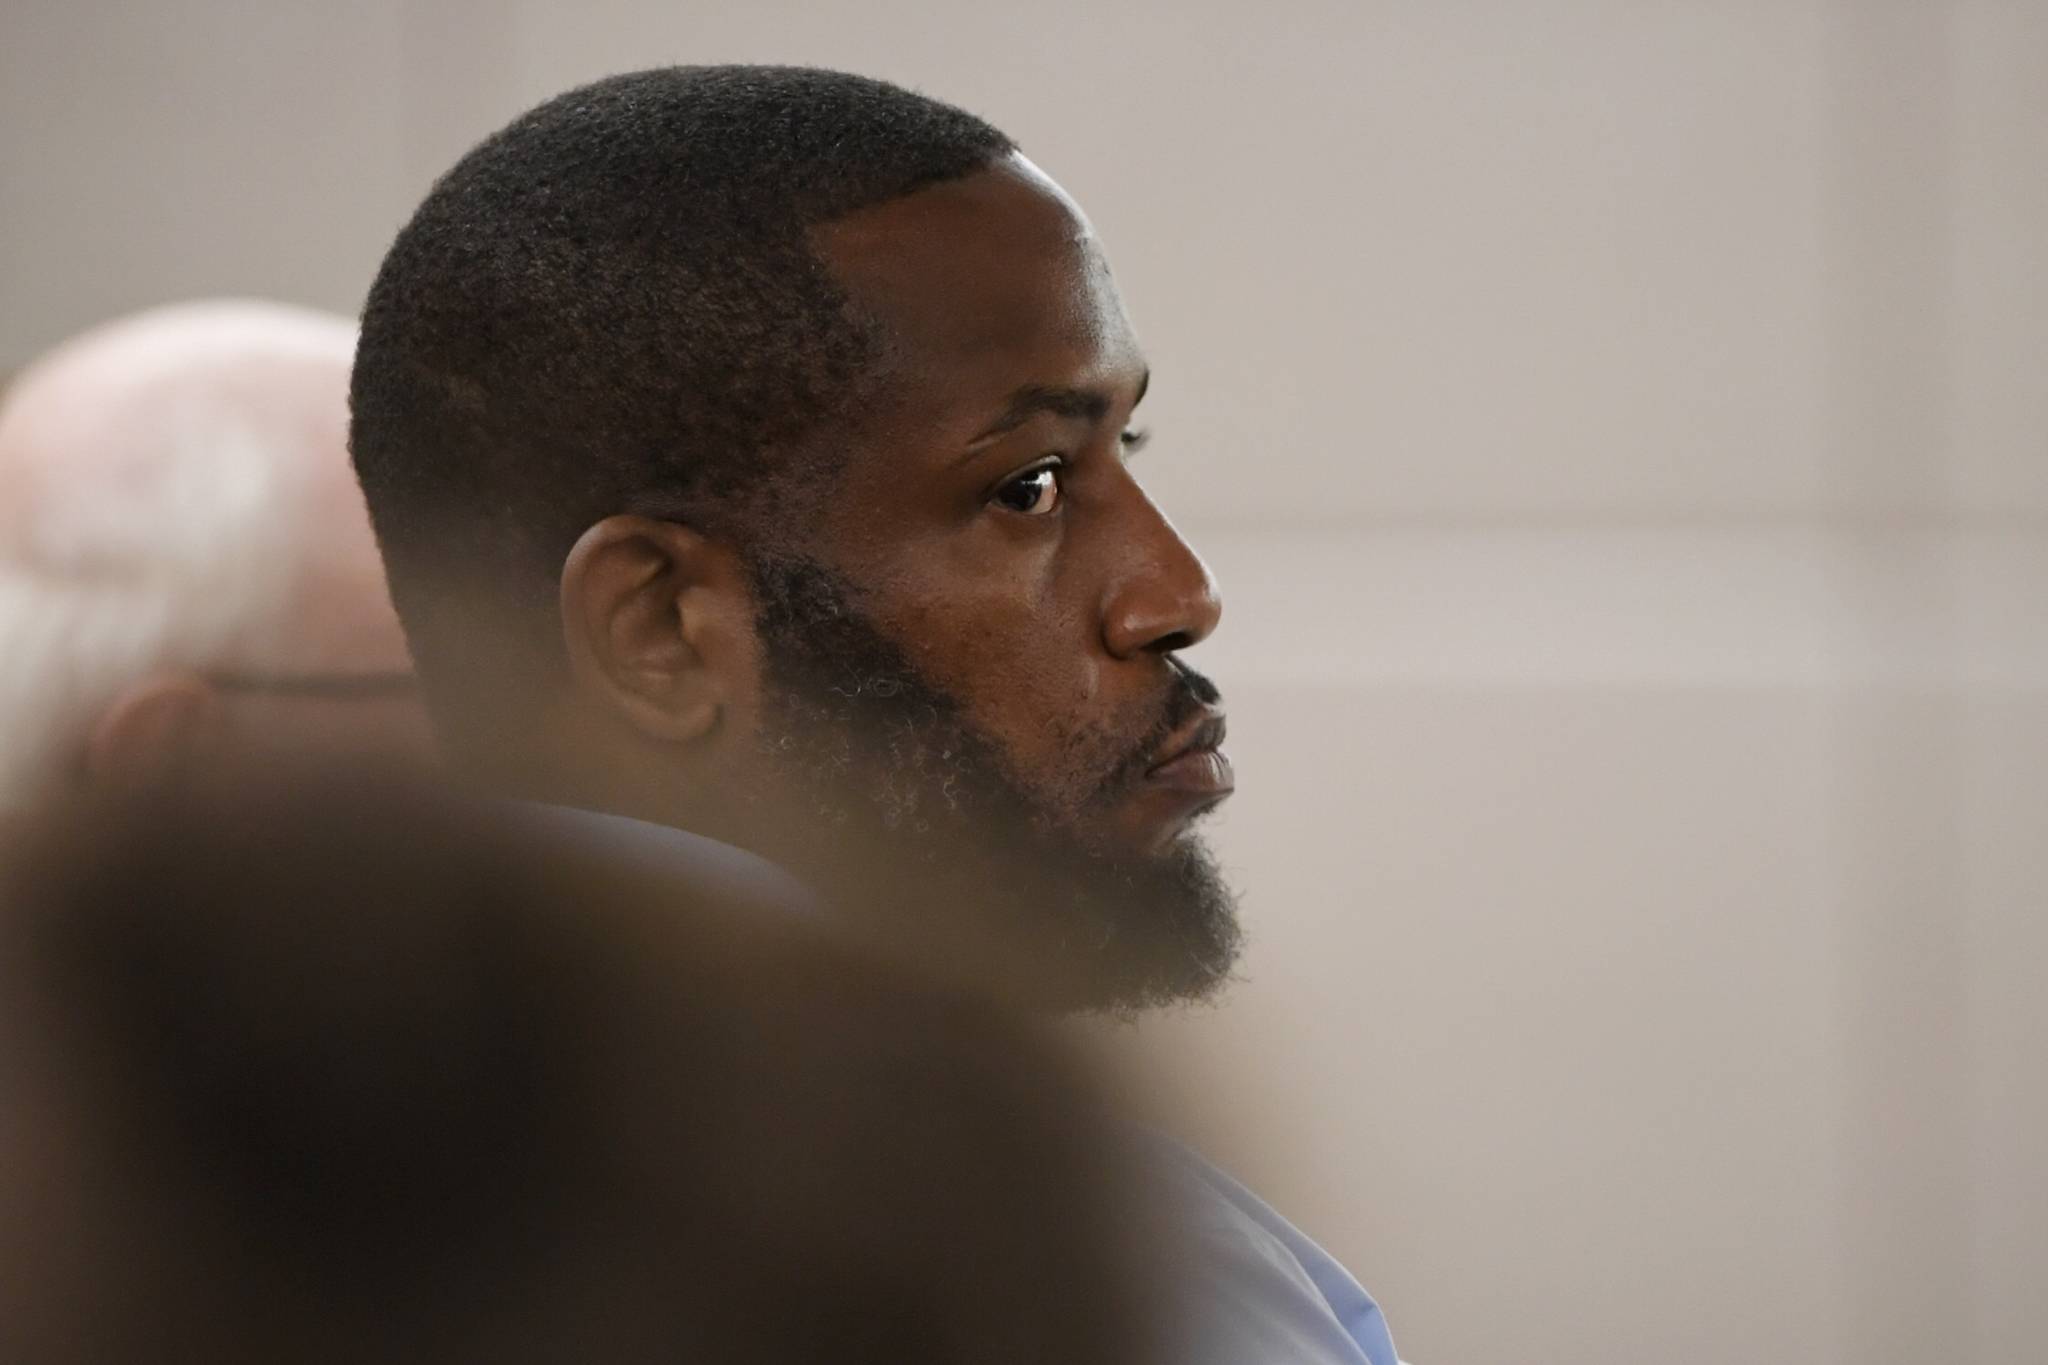 Laron Carlton Graham listens in Juneau Superior Court on Wednesday, Sept. 4, 2019, during his trial on two counts of first-degree murder for the November 2015 shooting deaths of 36-year-old Robert H. Meireis and 34-year-old Elizabeth K. Tonsmeire. (Michael Penn | Juneau Empire)